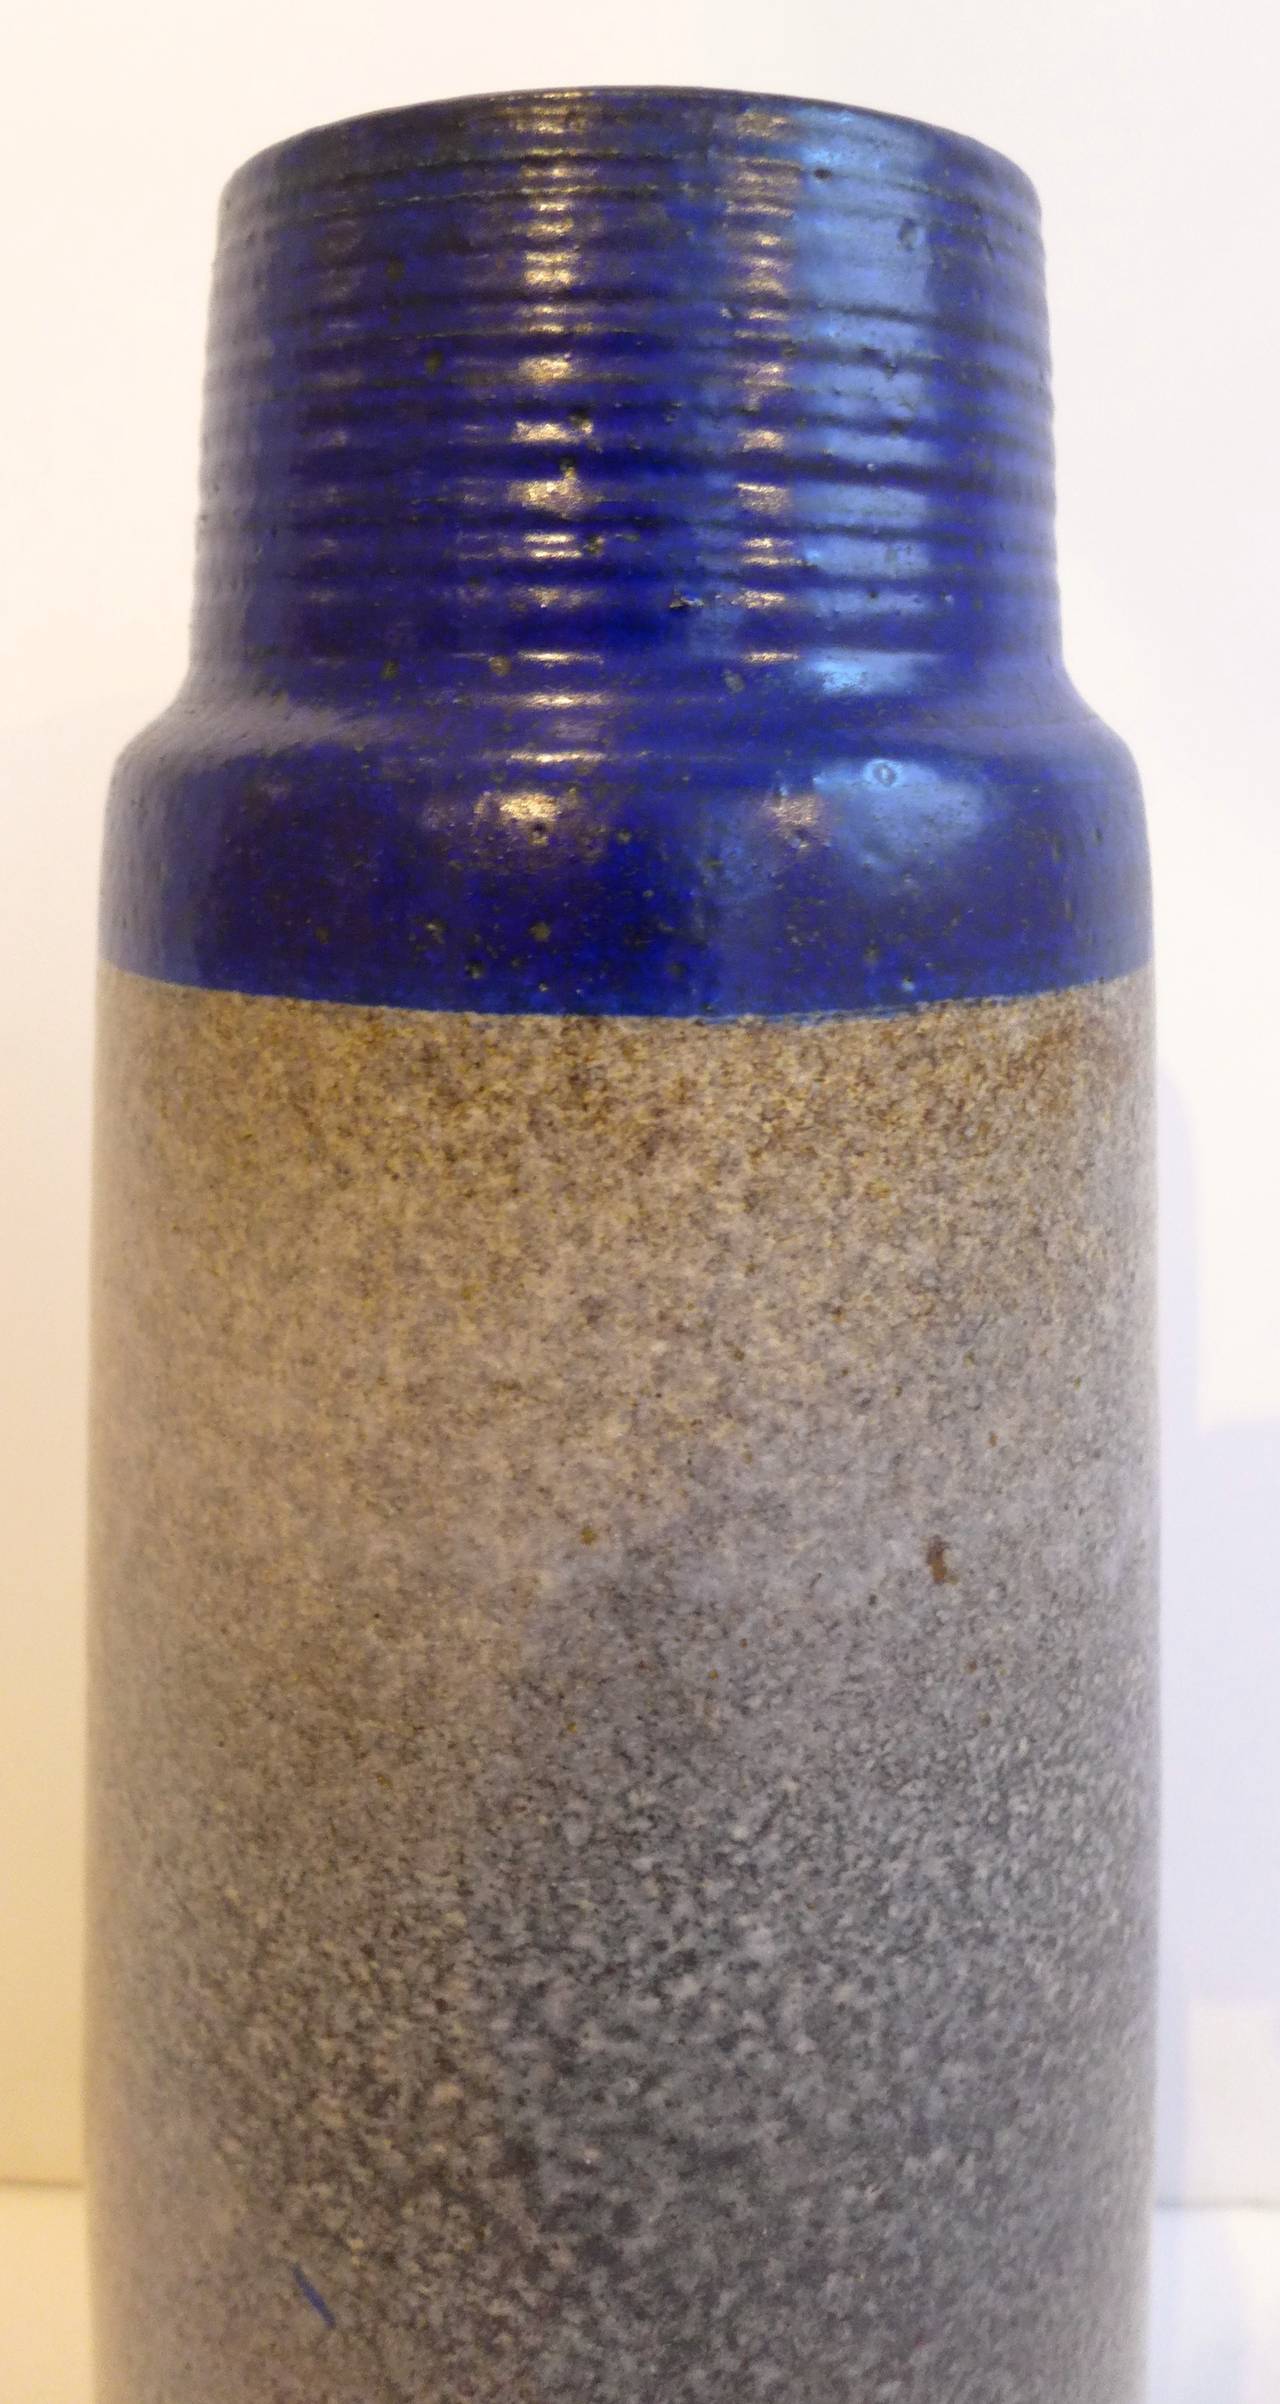 Hand-thrown and glazed stoneware vase from the Zaalberg atelier in Zuid, Holland, circa 1960s. A studio work by Herman Zaalberg, grandson of the first generation of Zaalberg potters in Holland. With a deep cobalt neck and shoulder, and